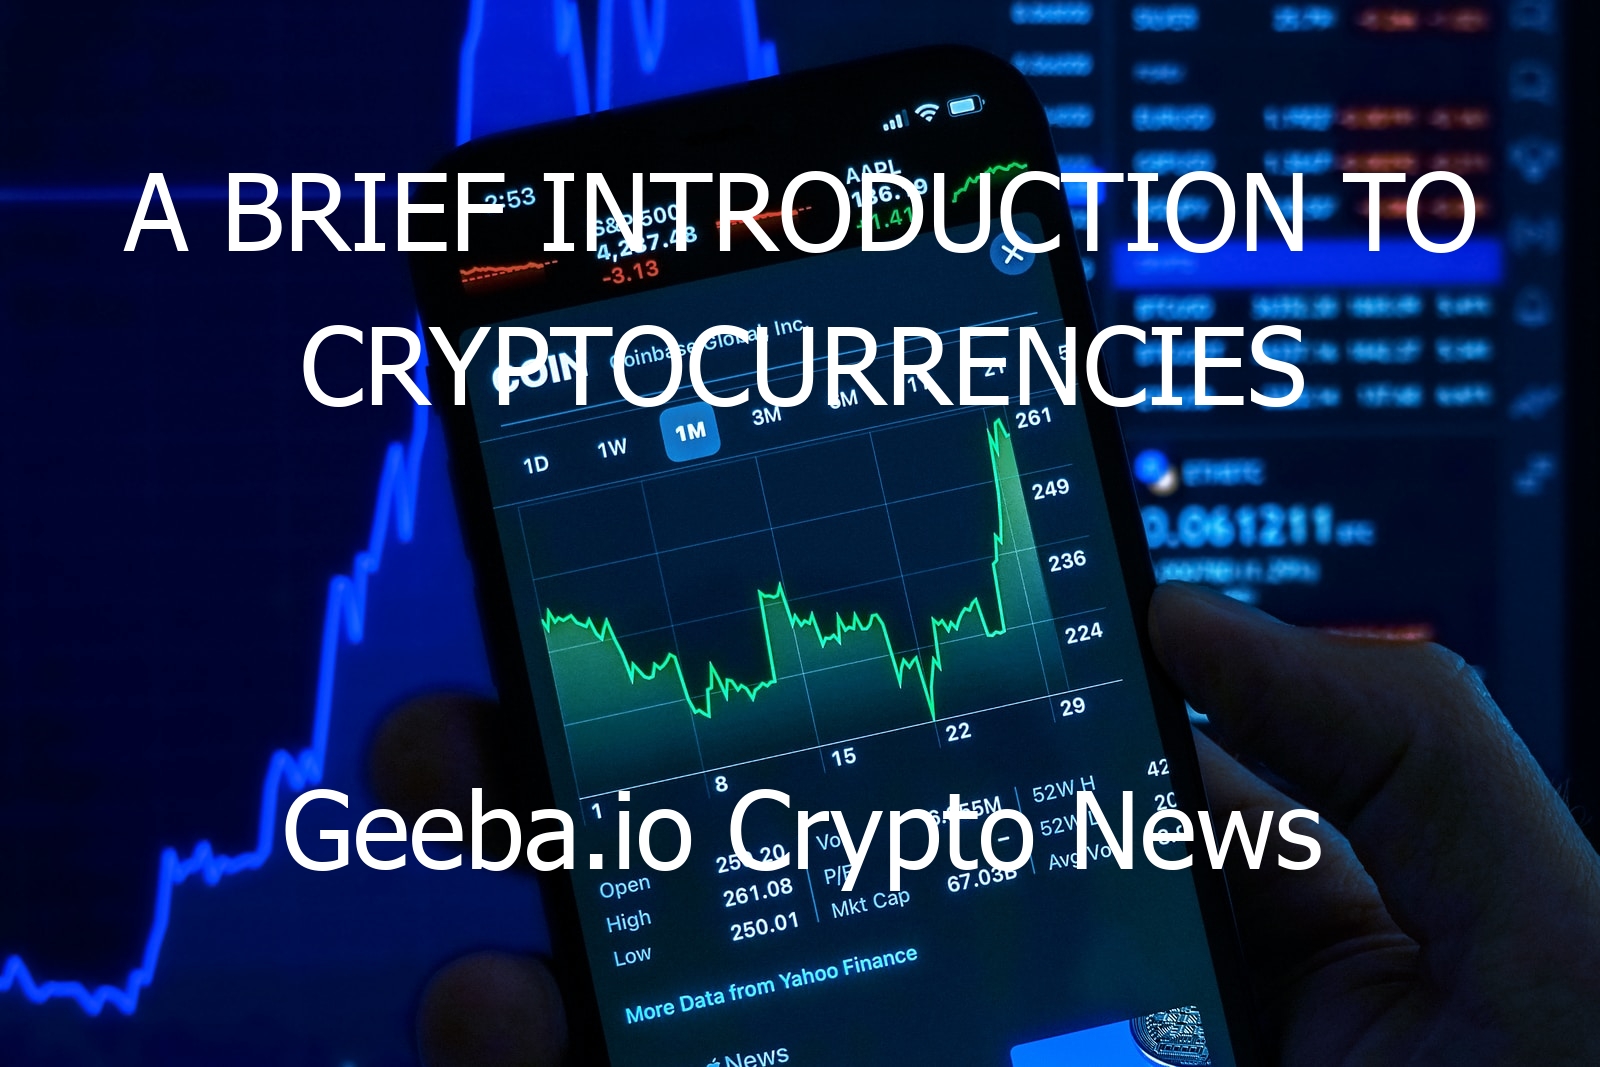 a brief introduction to cryptocurrencies 6567